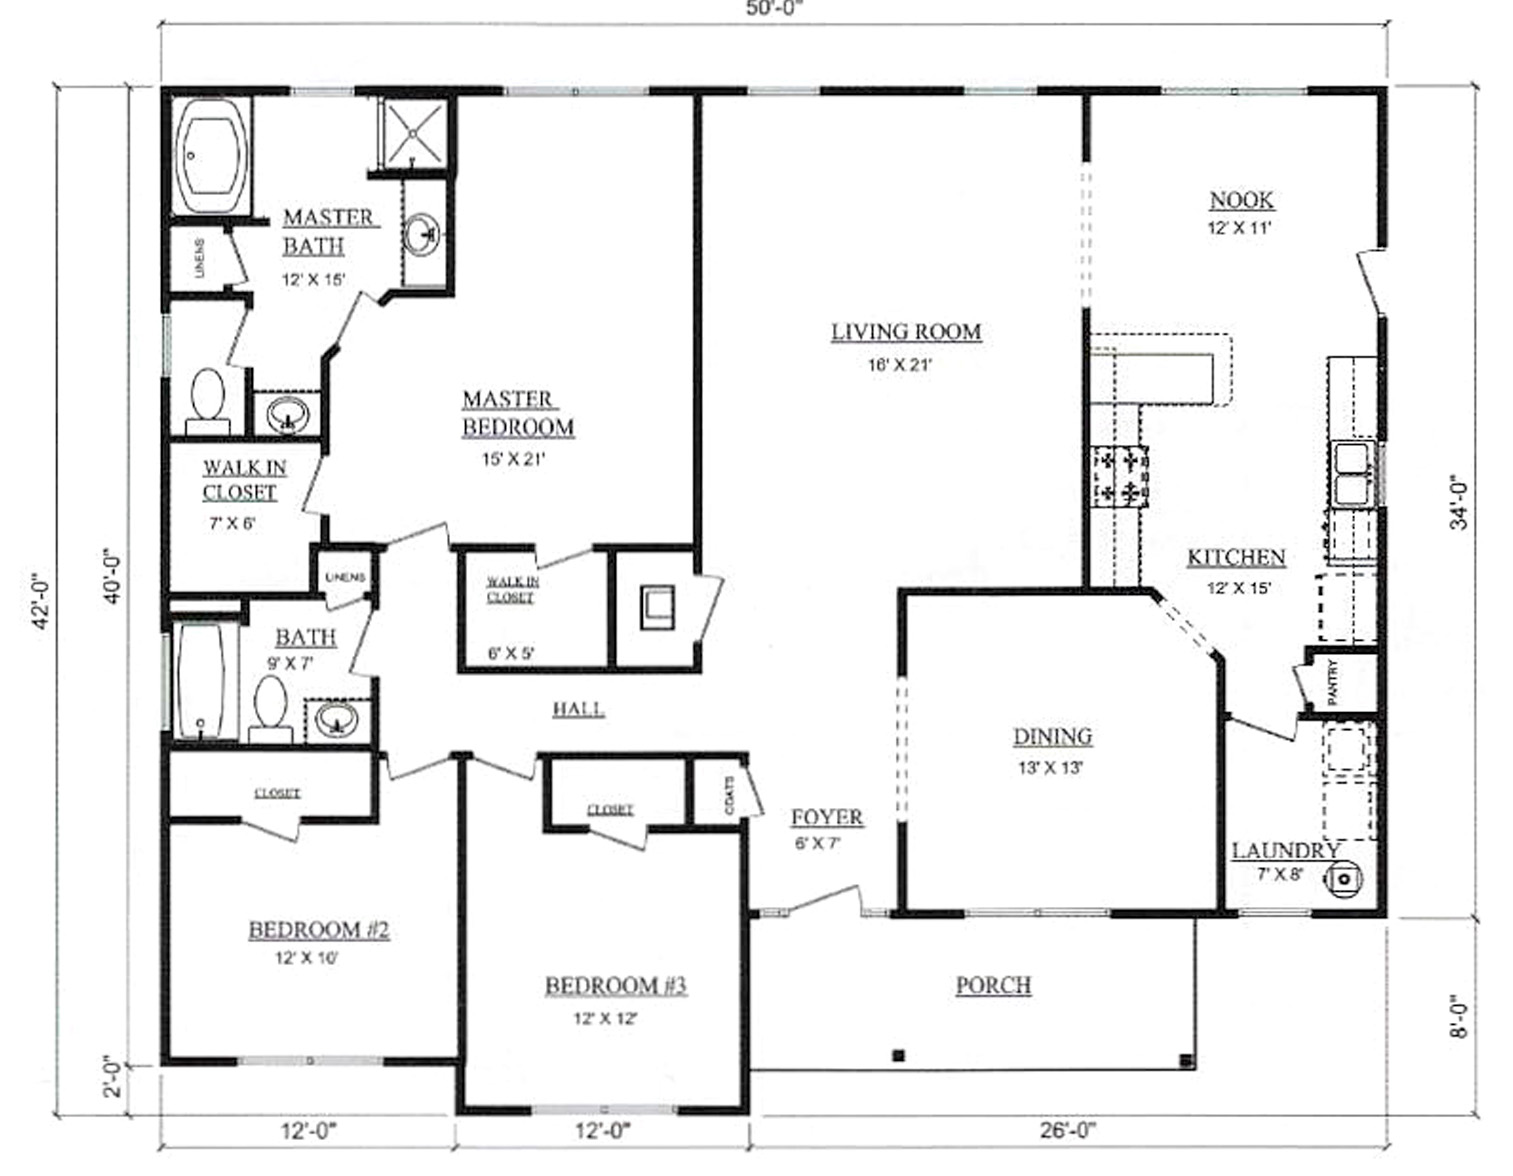 Plans for Pennyworth Homes Tallahassee Home Builder Charleston 3